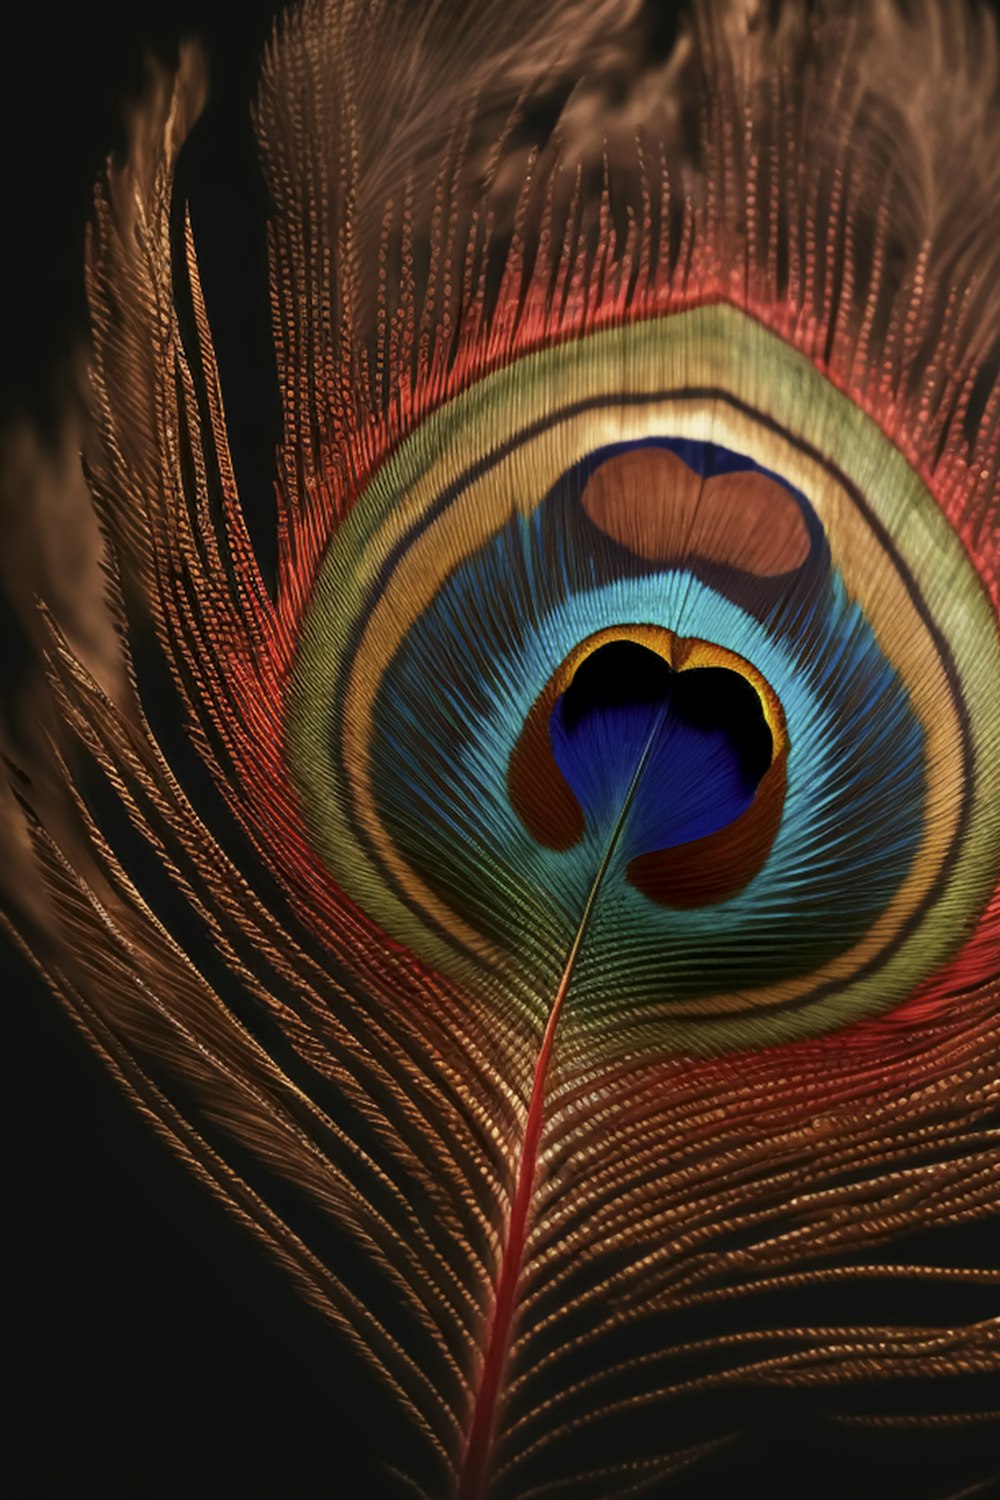 a close up of a peacock's feathers tail